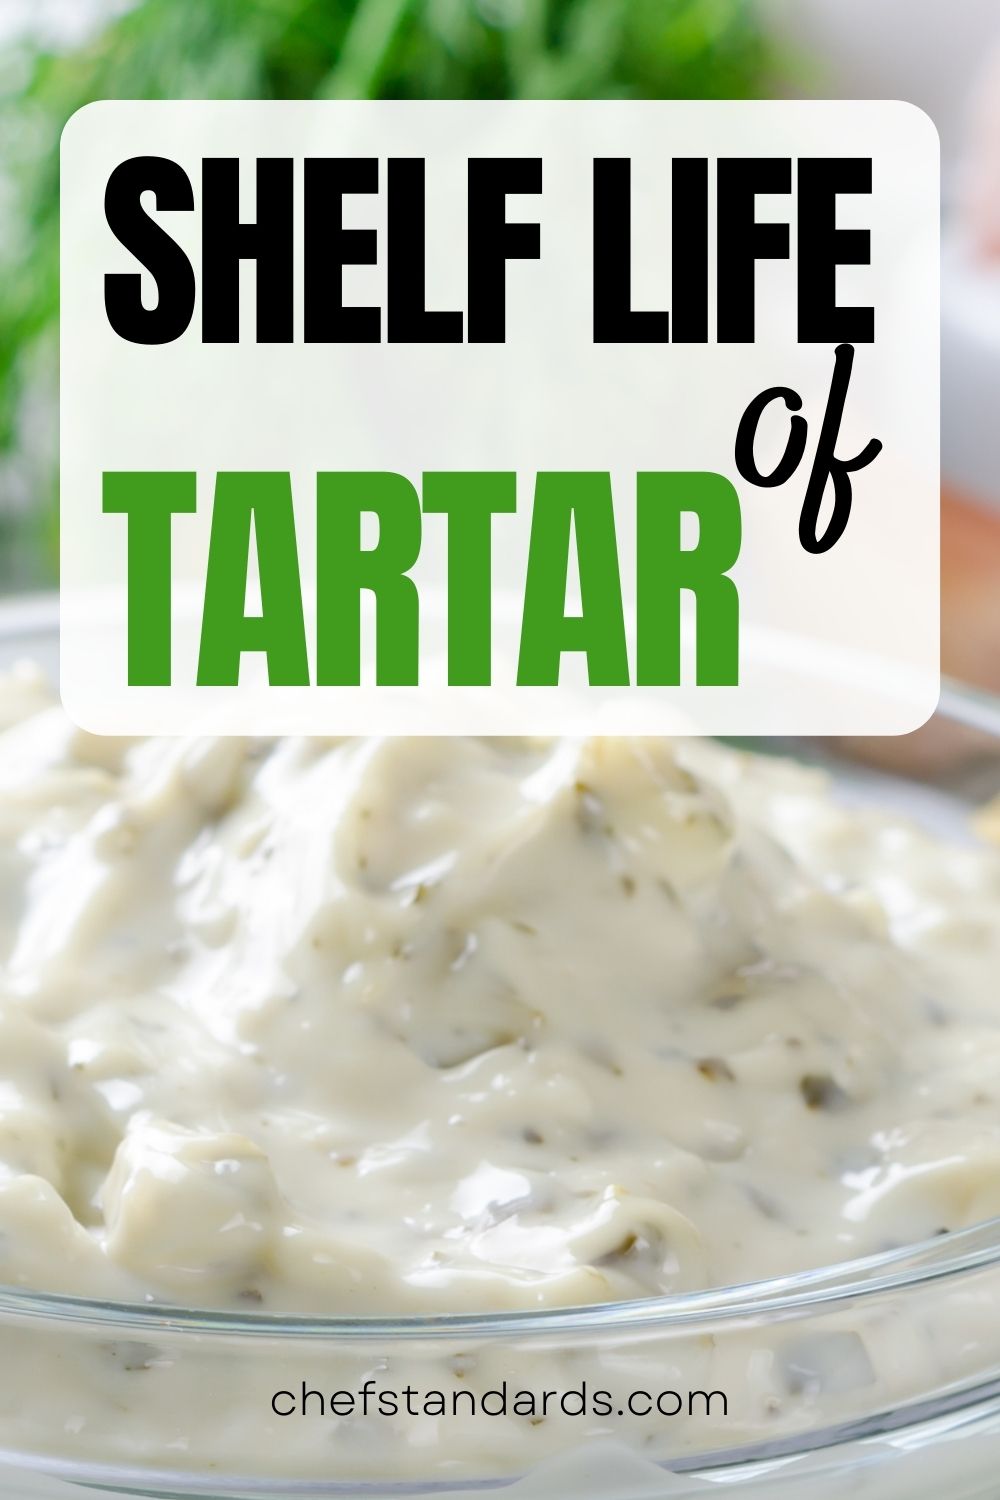 Does Cream Of Tartar Go Bad And What Are The Red Flags